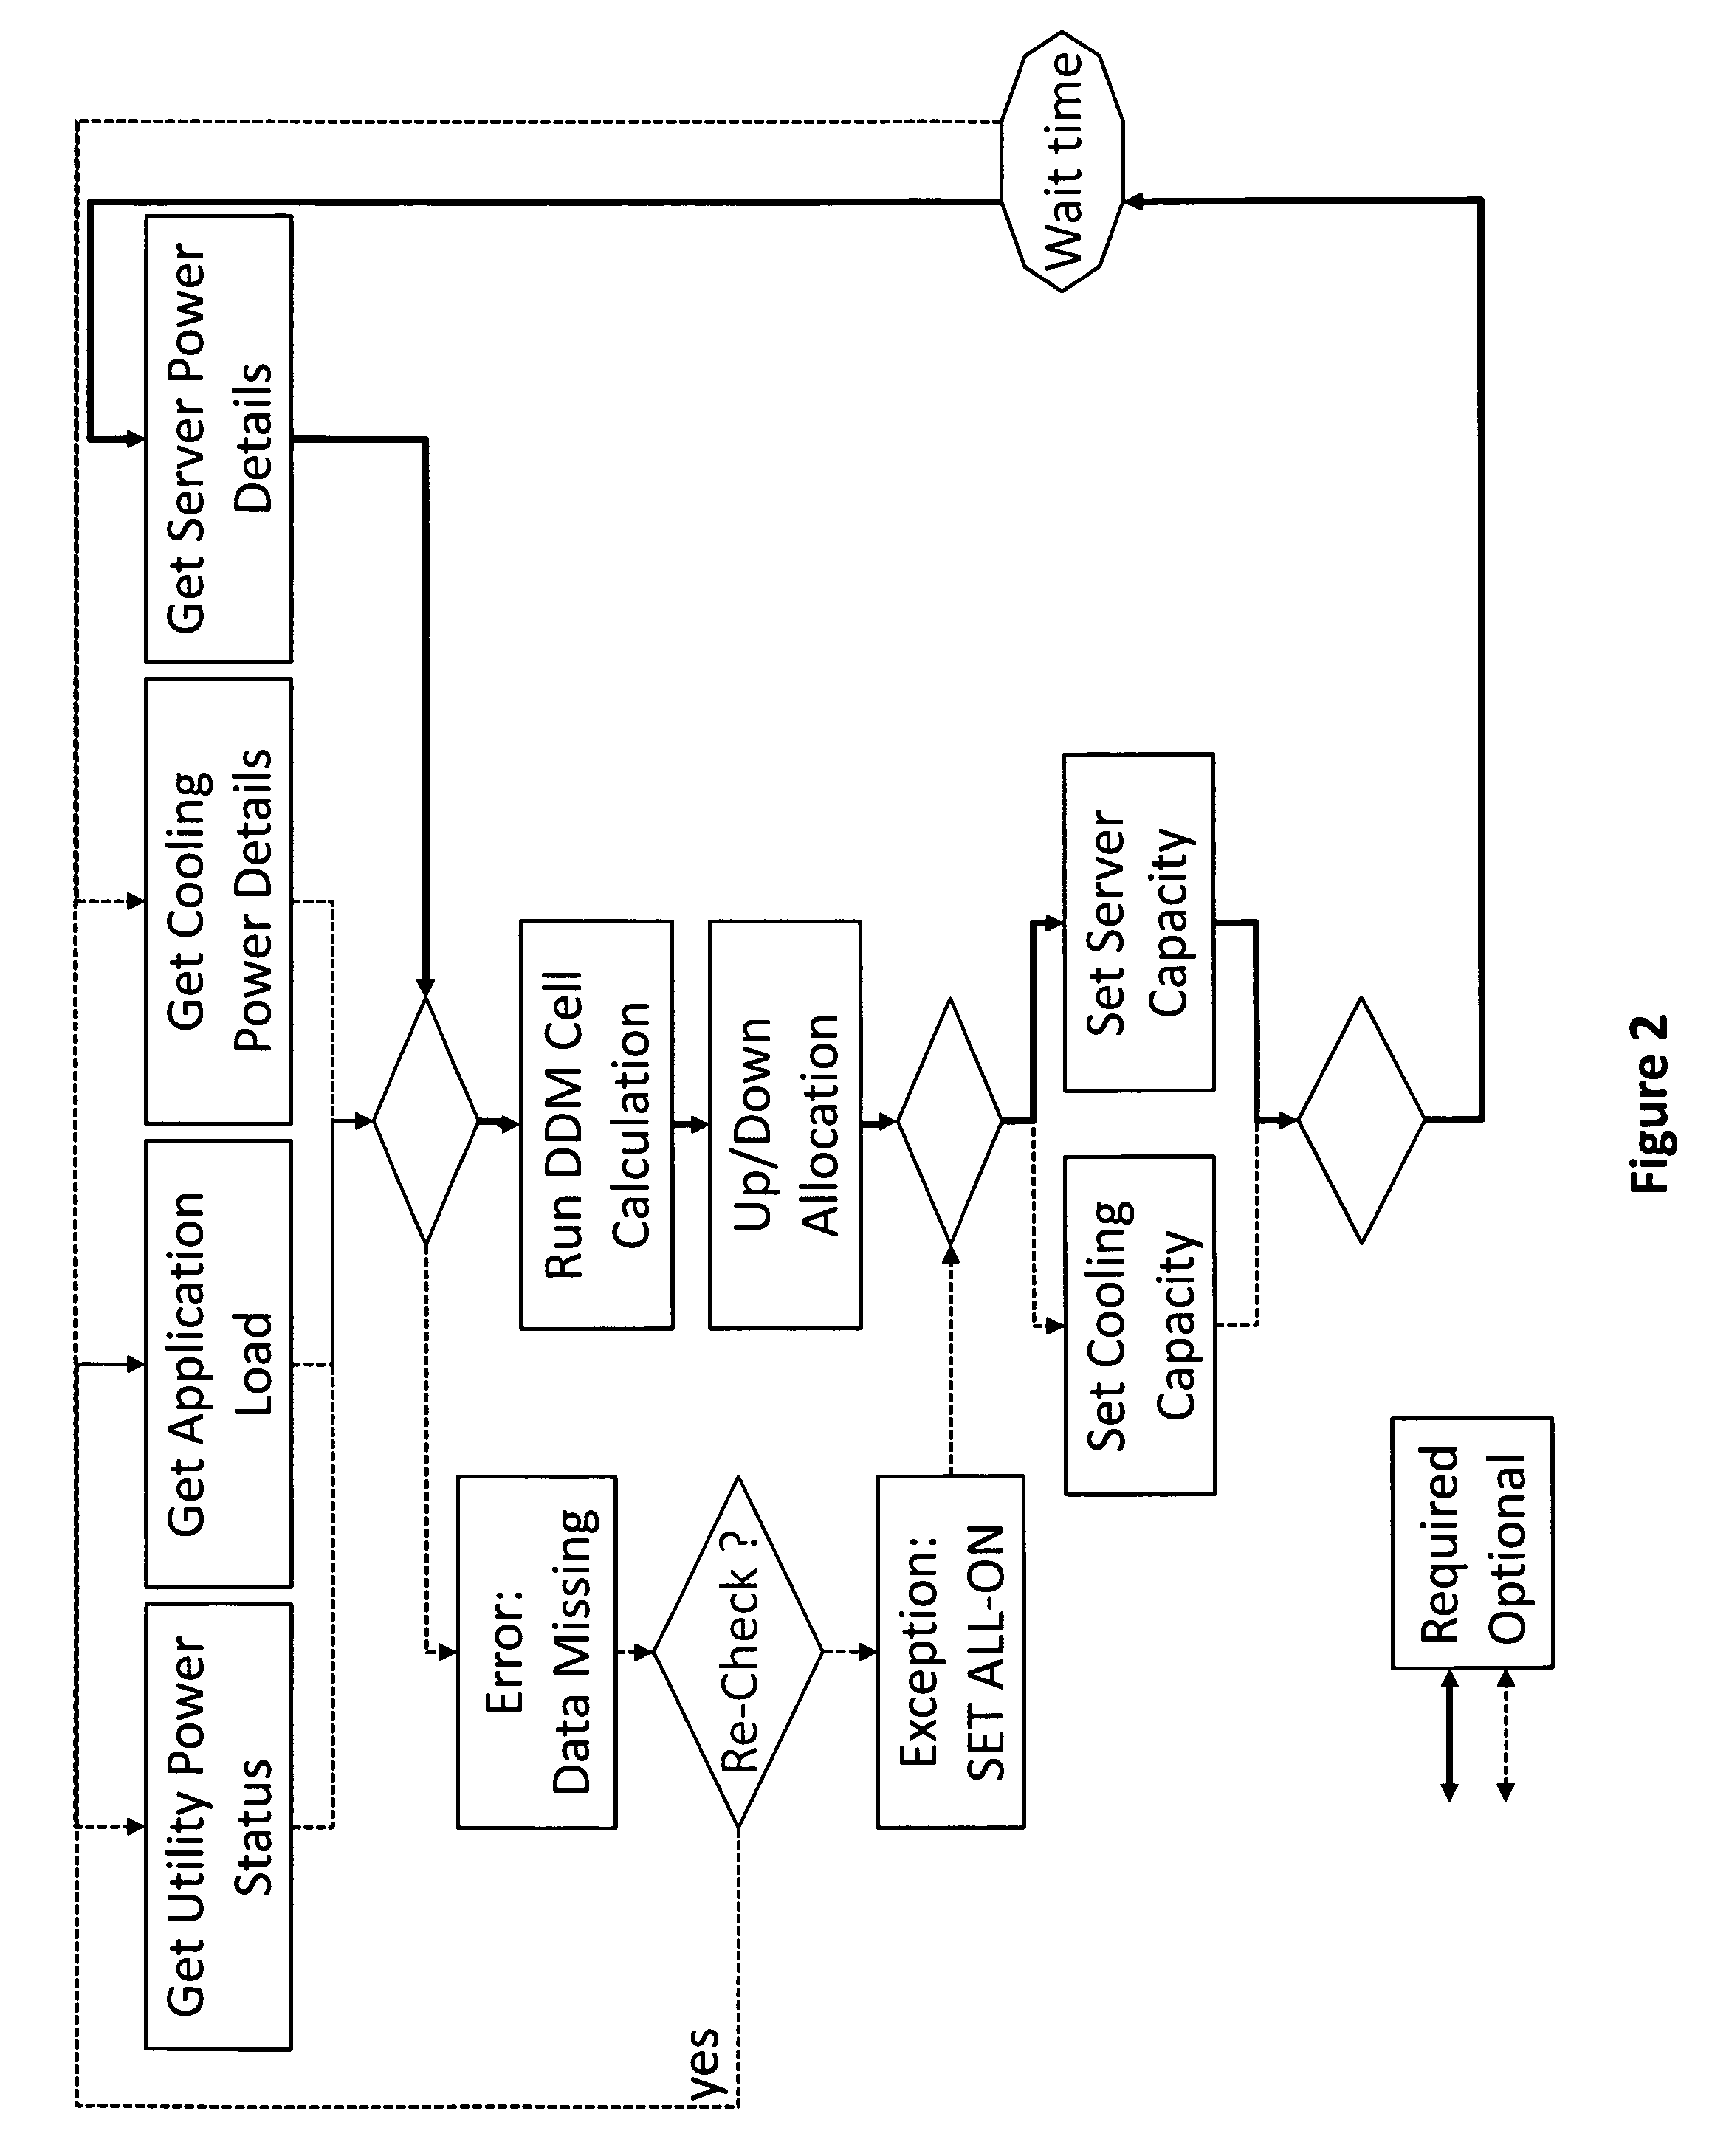 Method and apparatus for holistic power management to dynamically and automatically turn servers, network equipment and facility components on and off inside and across multiple data centers based on a variety of parameters without violating existing service levels